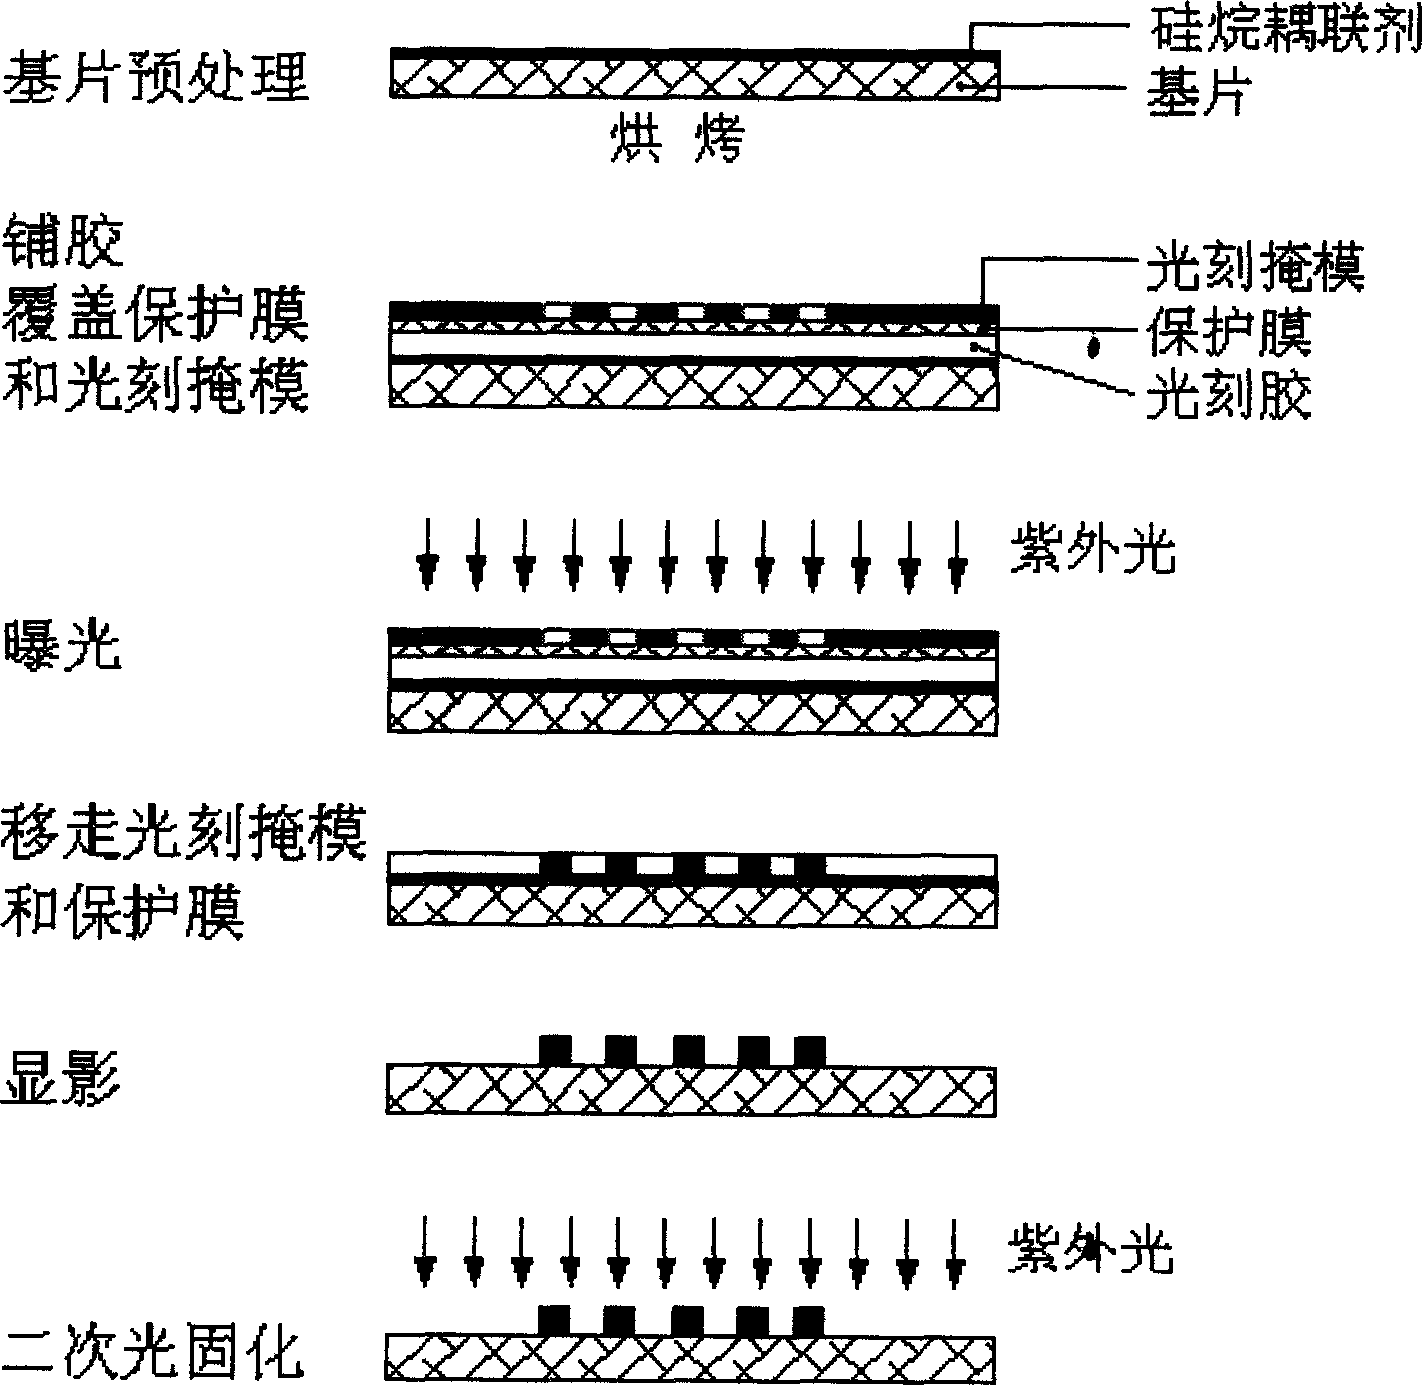 Method for making dimethyl silicone polymer micro flow control chip composite type optical cured resin die arrangement